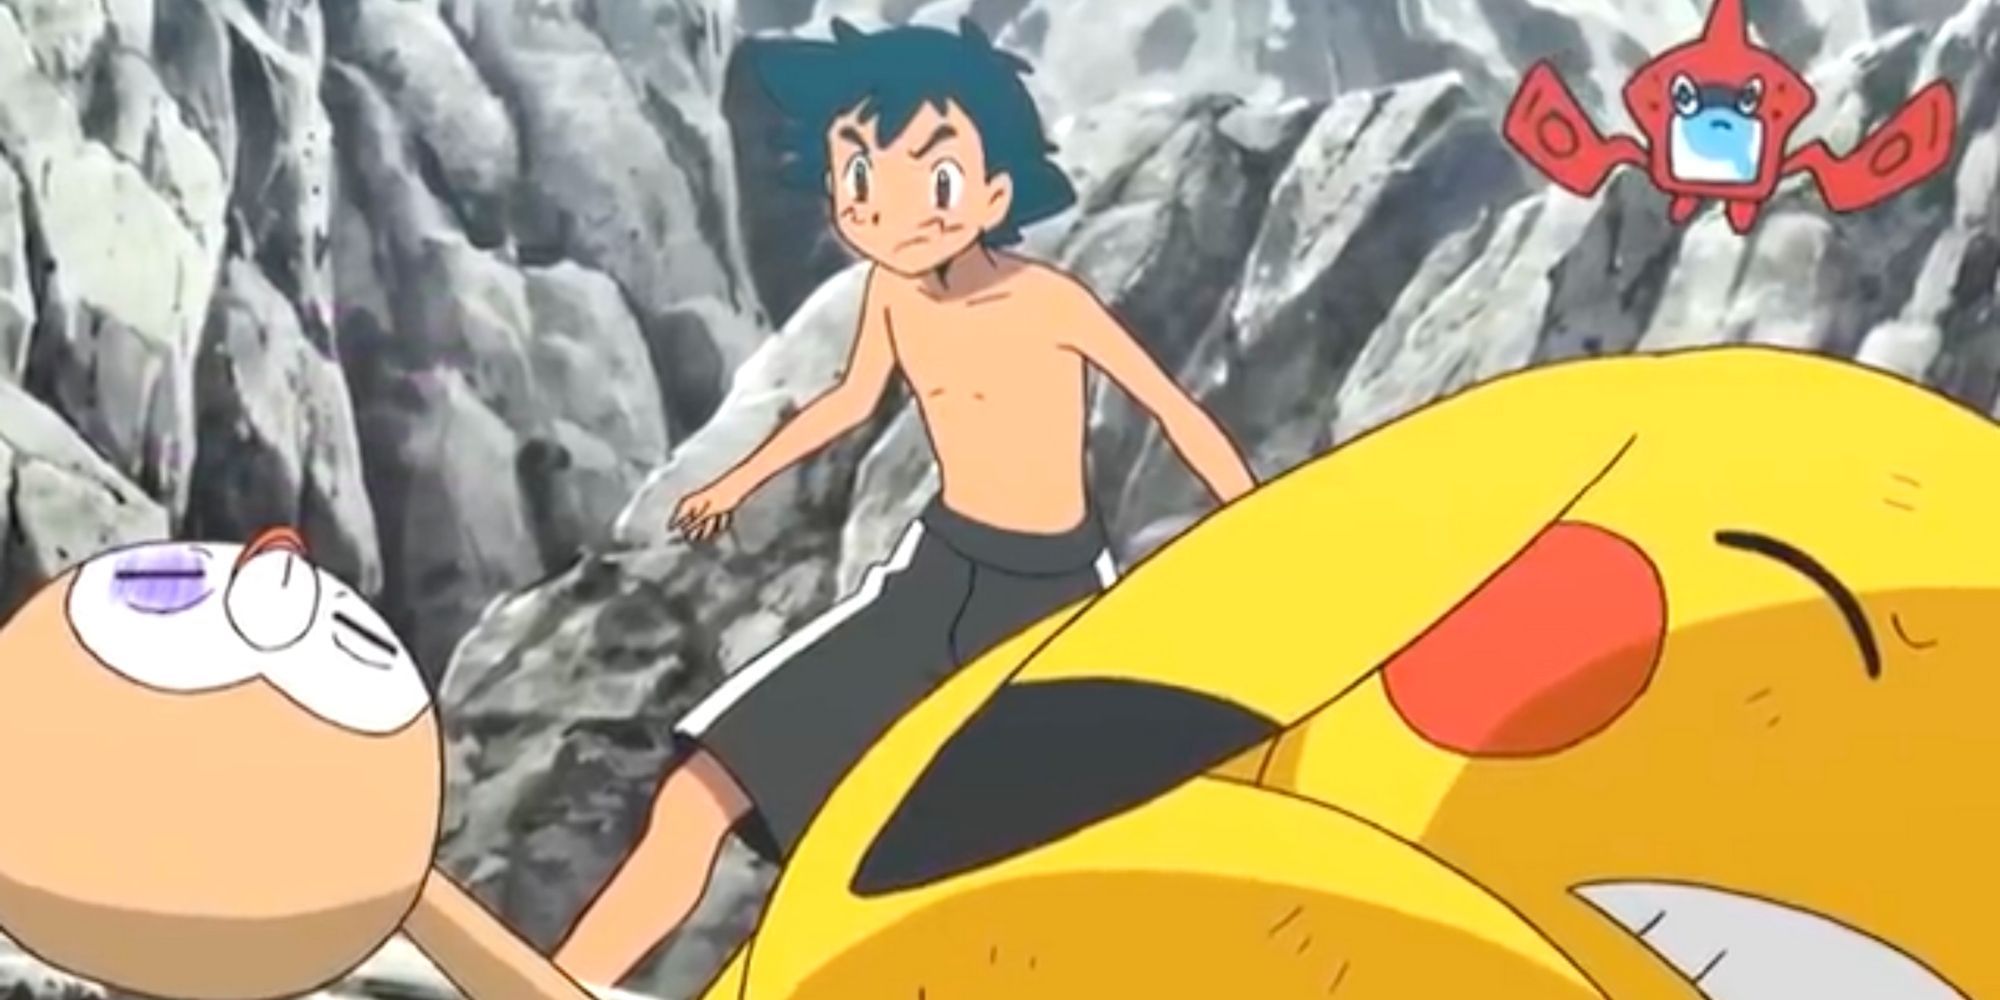 Pokemon: Ash, Rowlett And Pikachu Are Defeated In Battle By Jessie And James From Team Rocket